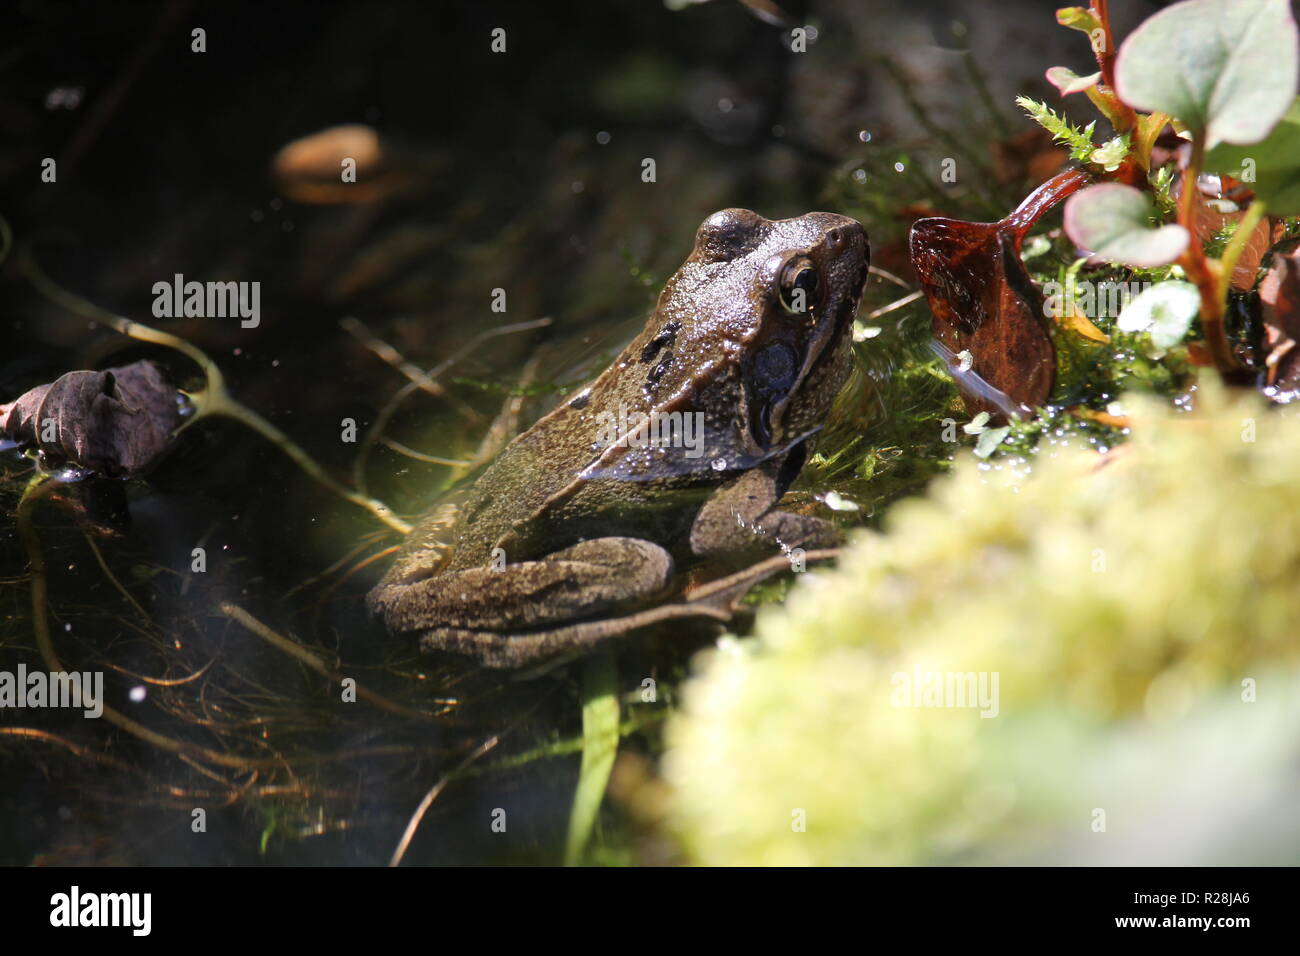 A European pond frog in a small forest lake surrounded by a variety of aquatic plants. Stock Photo